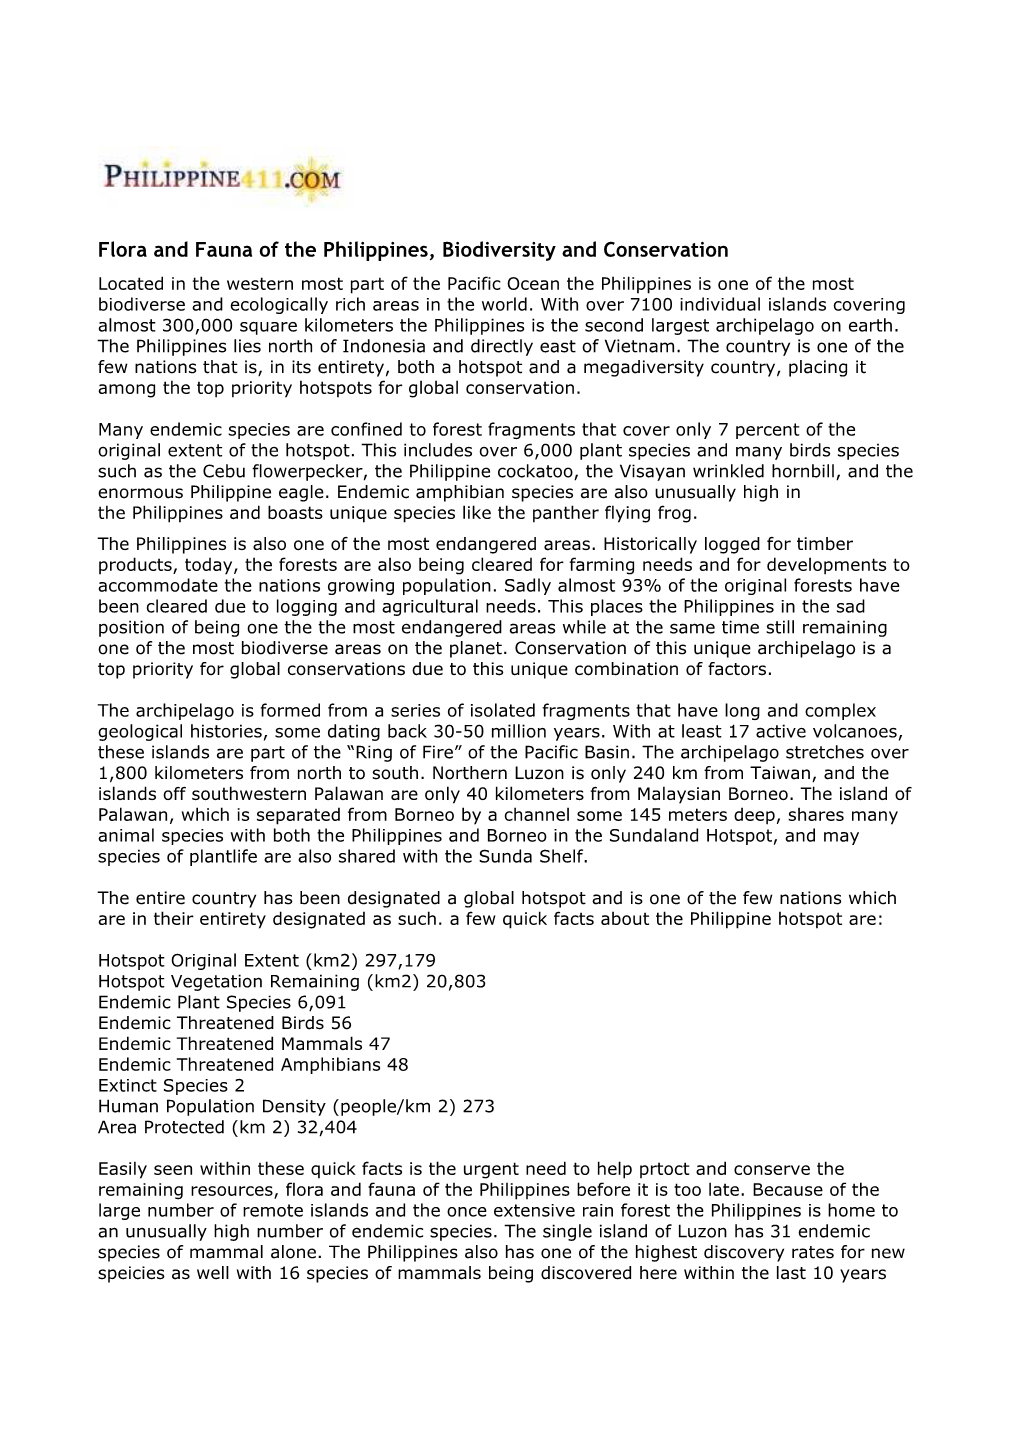 Flora and Fauna of the Philippines, Biodiversity and Conservation